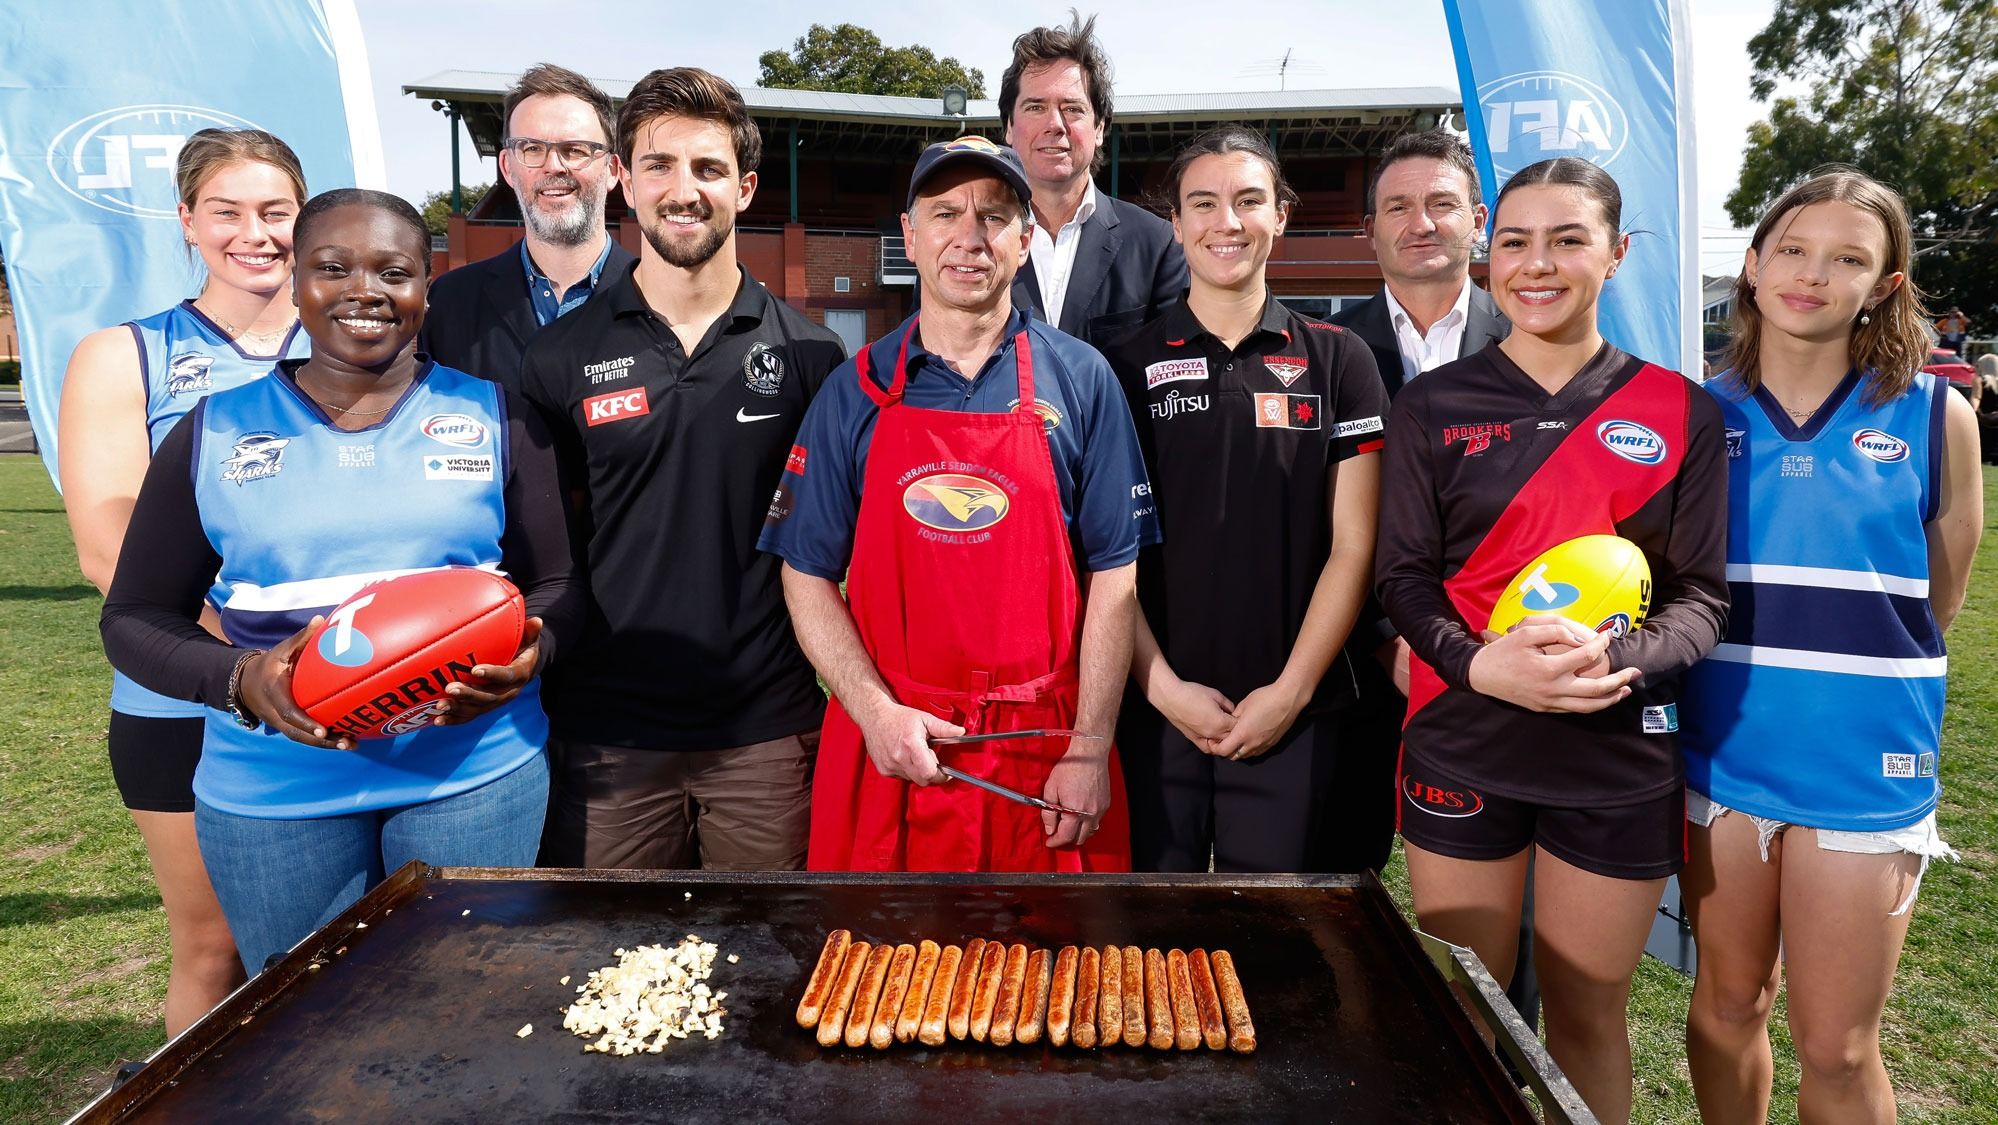 Members of the Western Region Football League are joined by (L-R) Telstra's Brent Smart, Collingwood's Josh Daicos, AFL CEO Gillon McLachlan, Essendon's Bonnie Toogood and AFL's Rob Auld